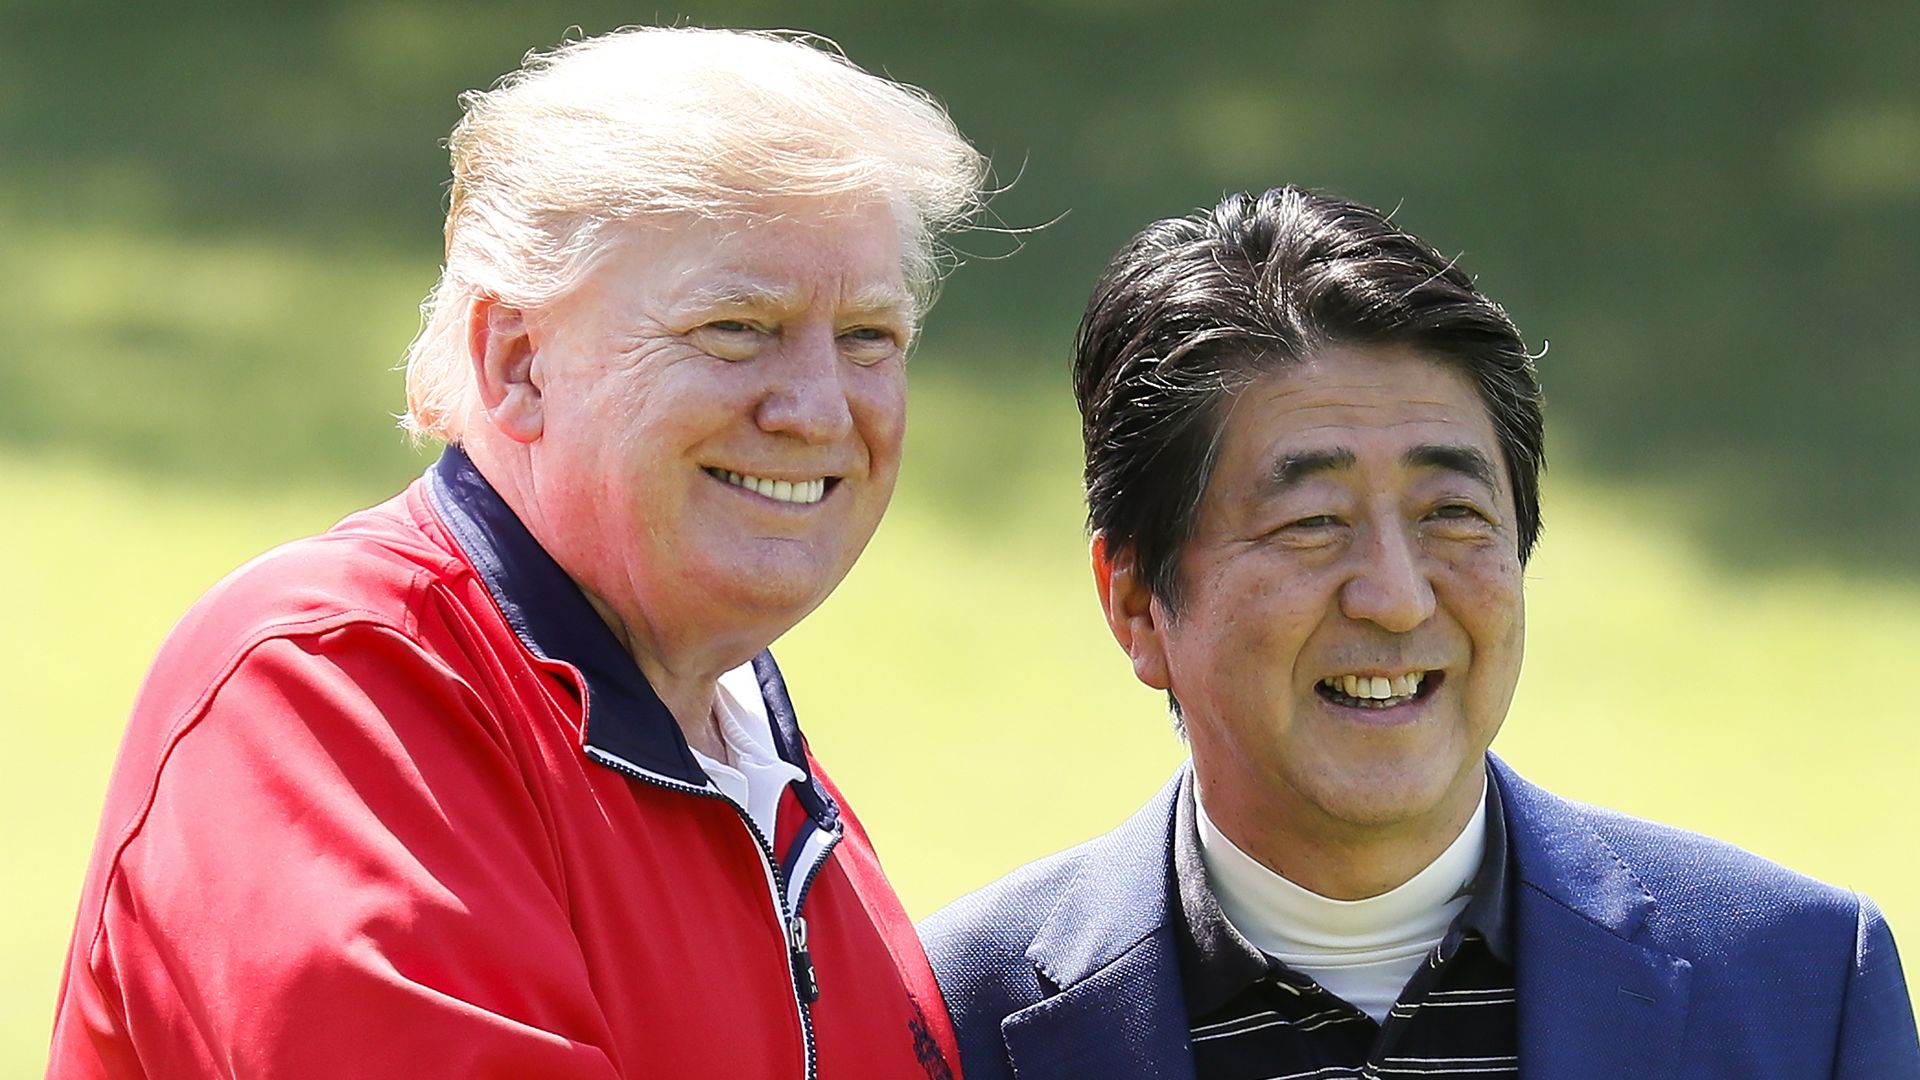  President Trump (L) is welcomed by Japanese Prime Minister Shinzo Abe as he arrives to play golf at Mobara Country Club on May 26, 2019 in Chiba, Japan.